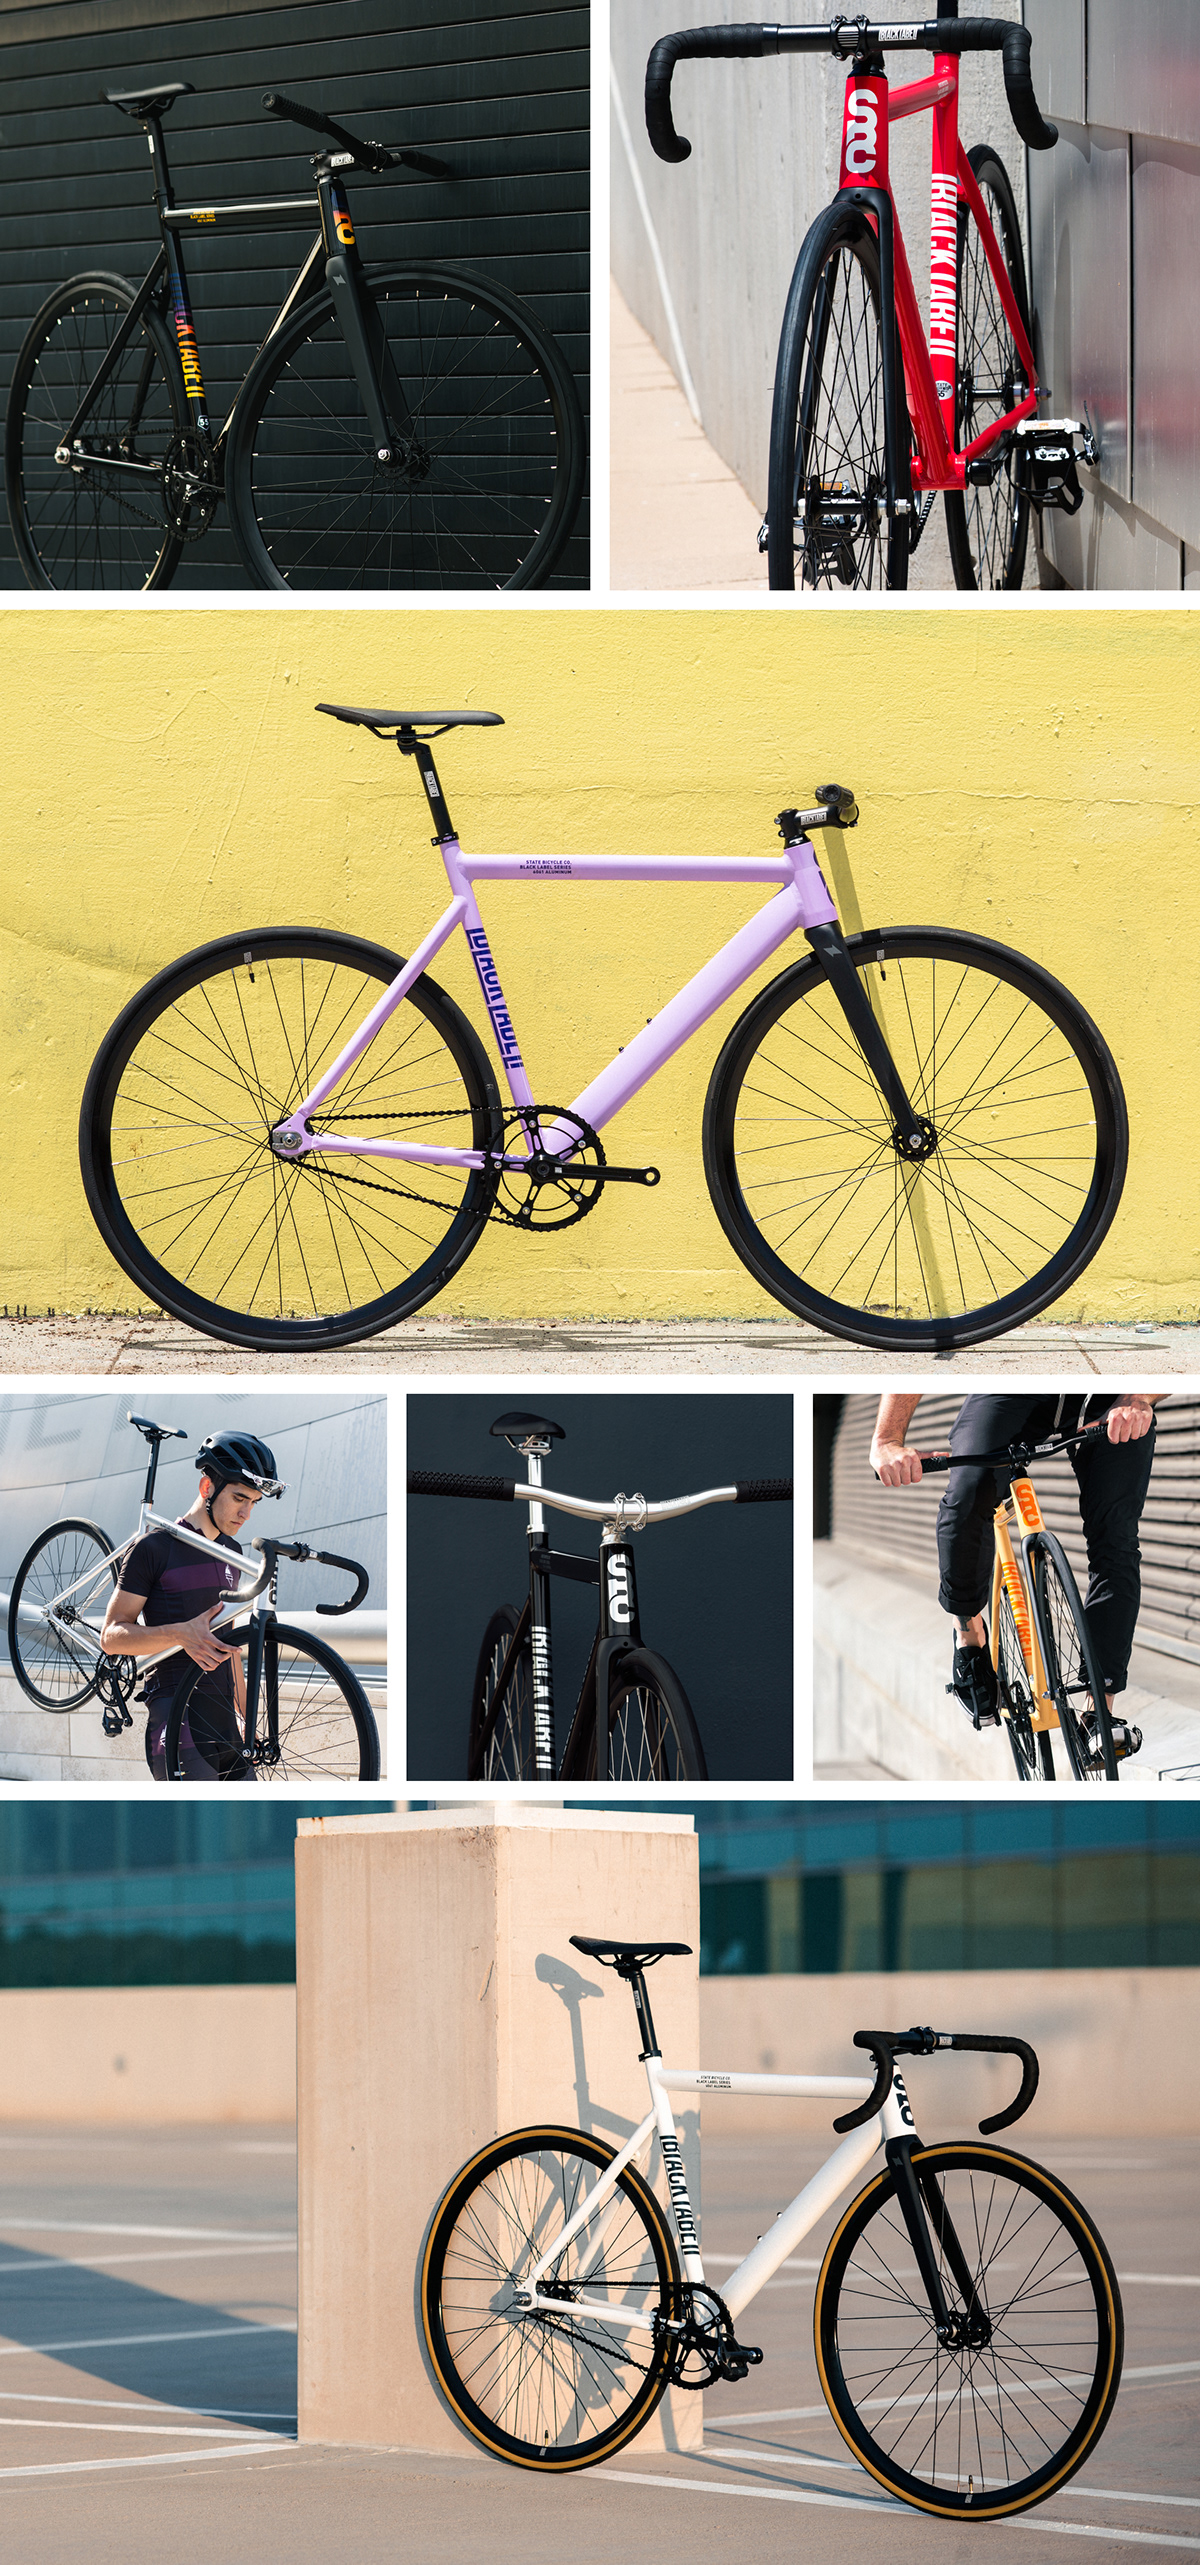 Bicycle Bicycles bikes bike design Bicycle Design State Bicycle Co fixie fixed gear Bike Cycling